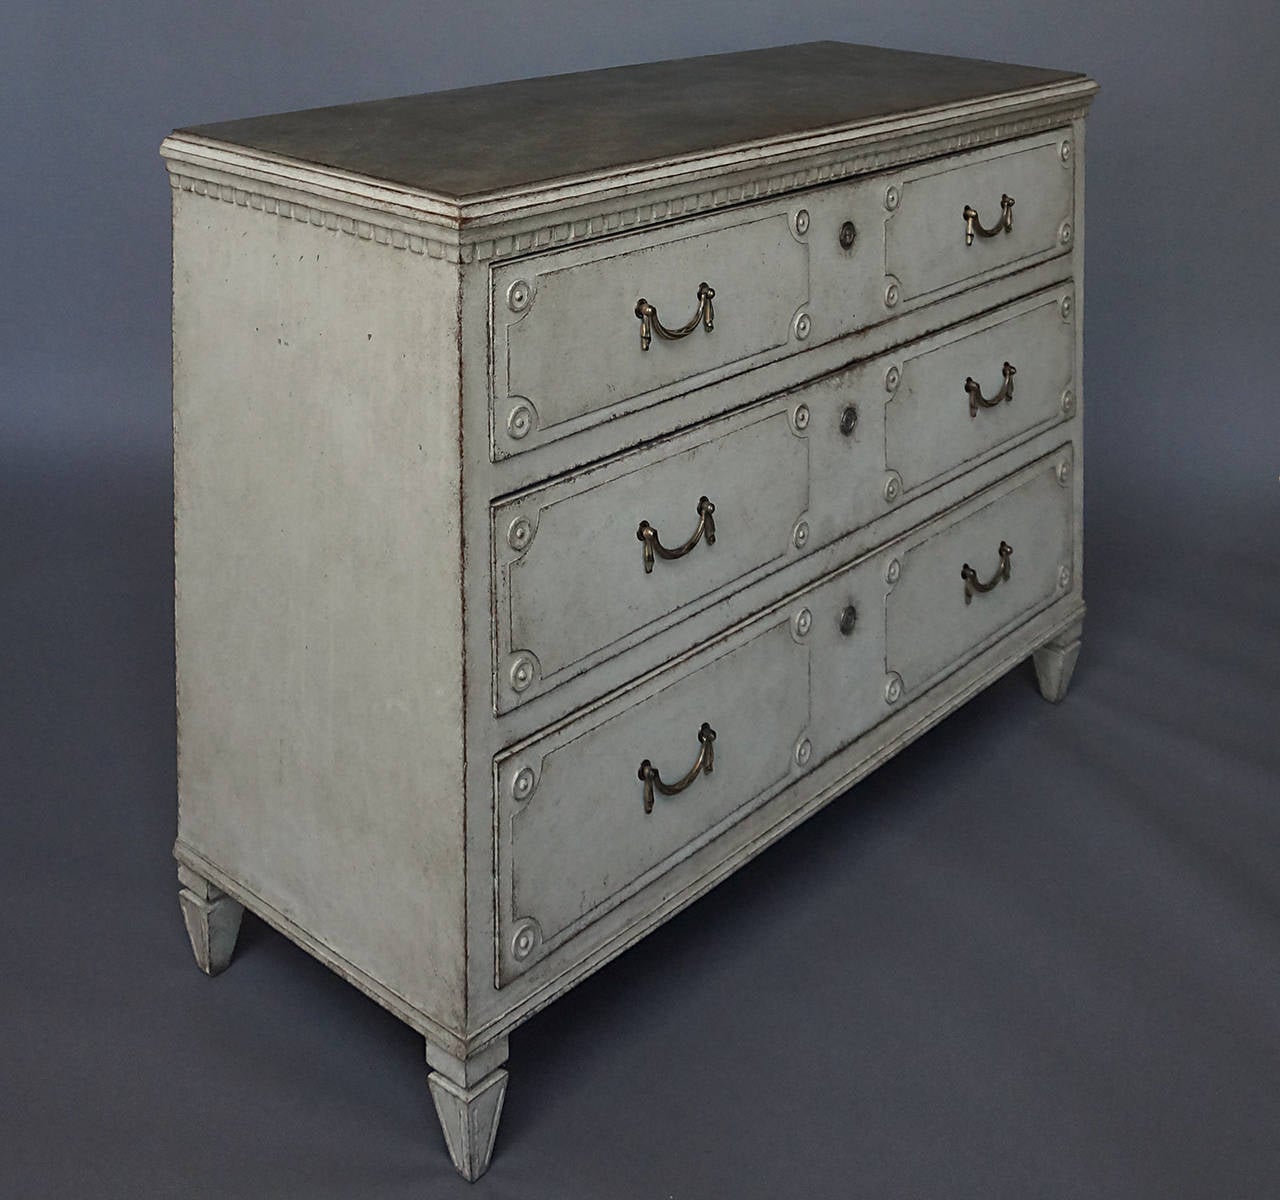 Swedish chest of drawers, circa 1870, with original swagged brass hardware. Dentil molding under the marbleized top and three drawers each having two raised panels with rondels inset at each corner.